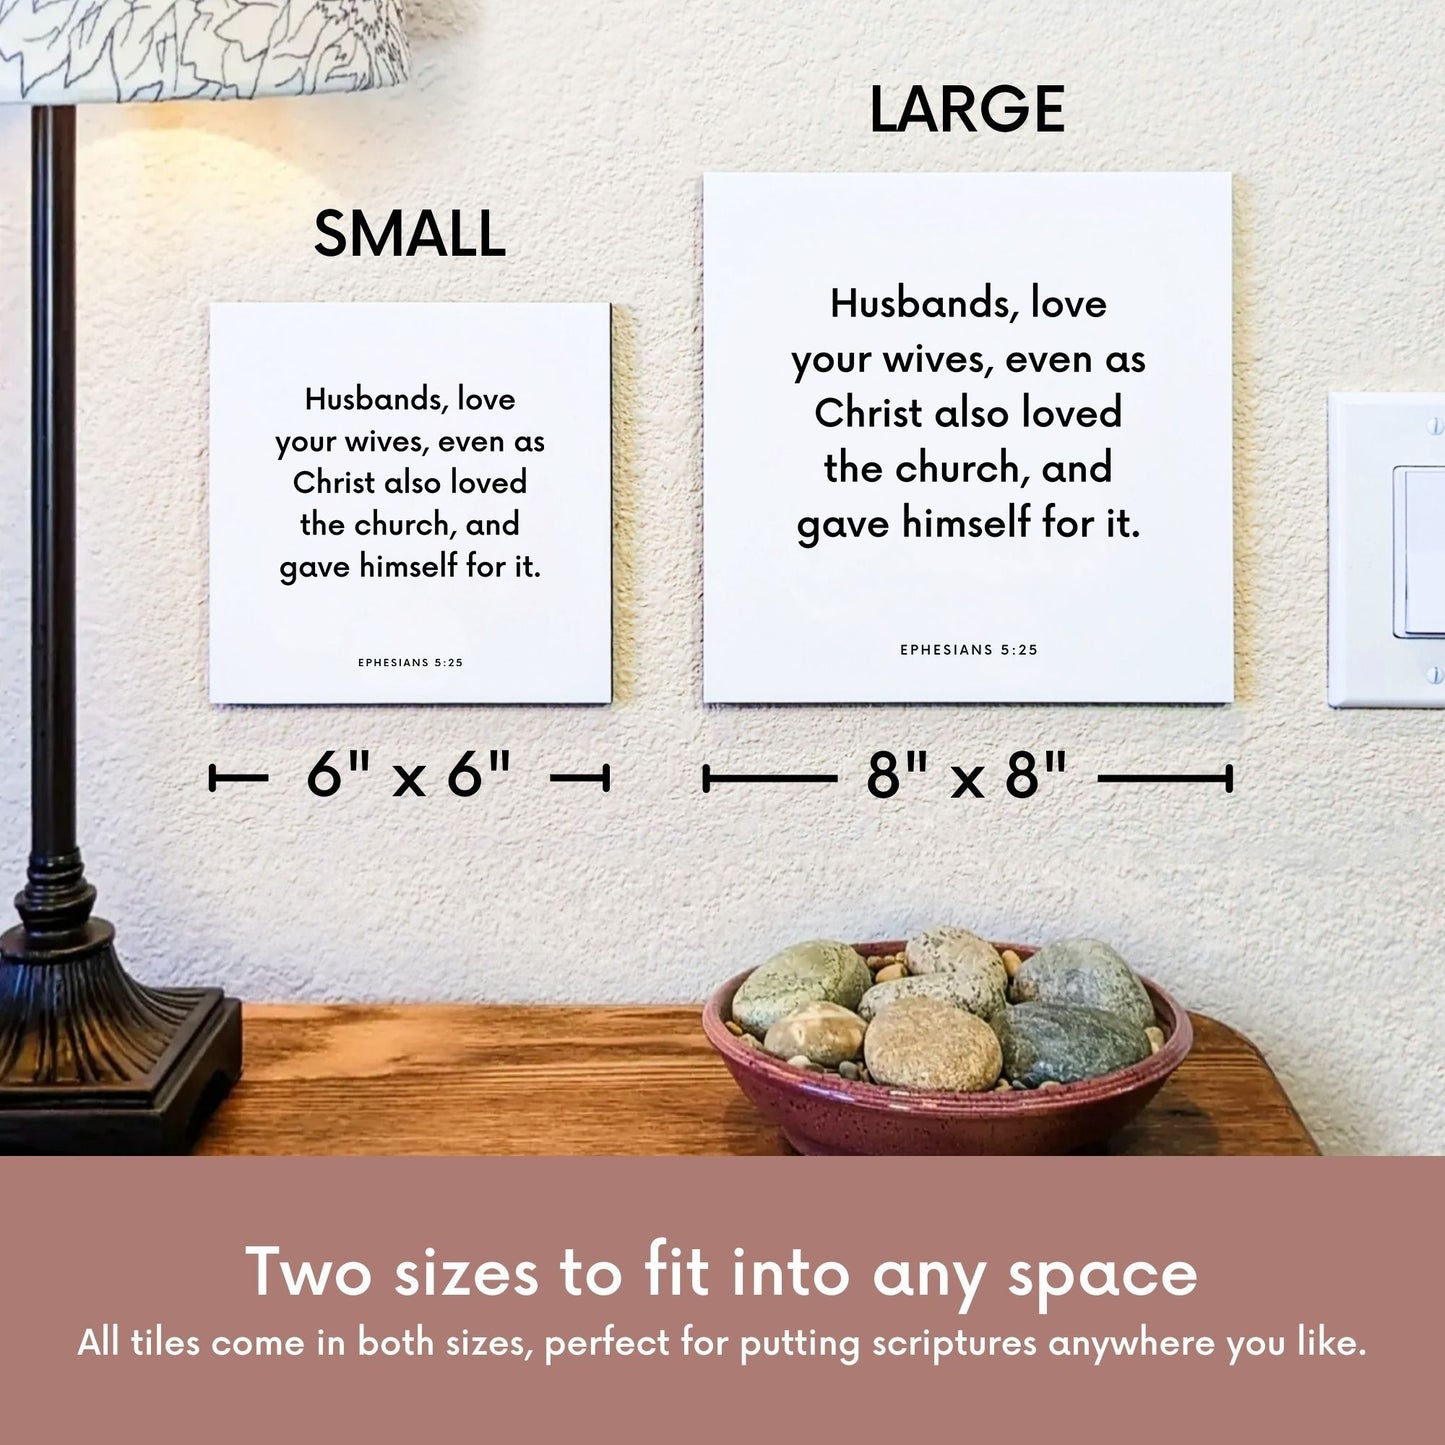 Scripture tile size comparison for Ephesians 5:25 - "Husbands, love your wives, even as Christ loved the church"